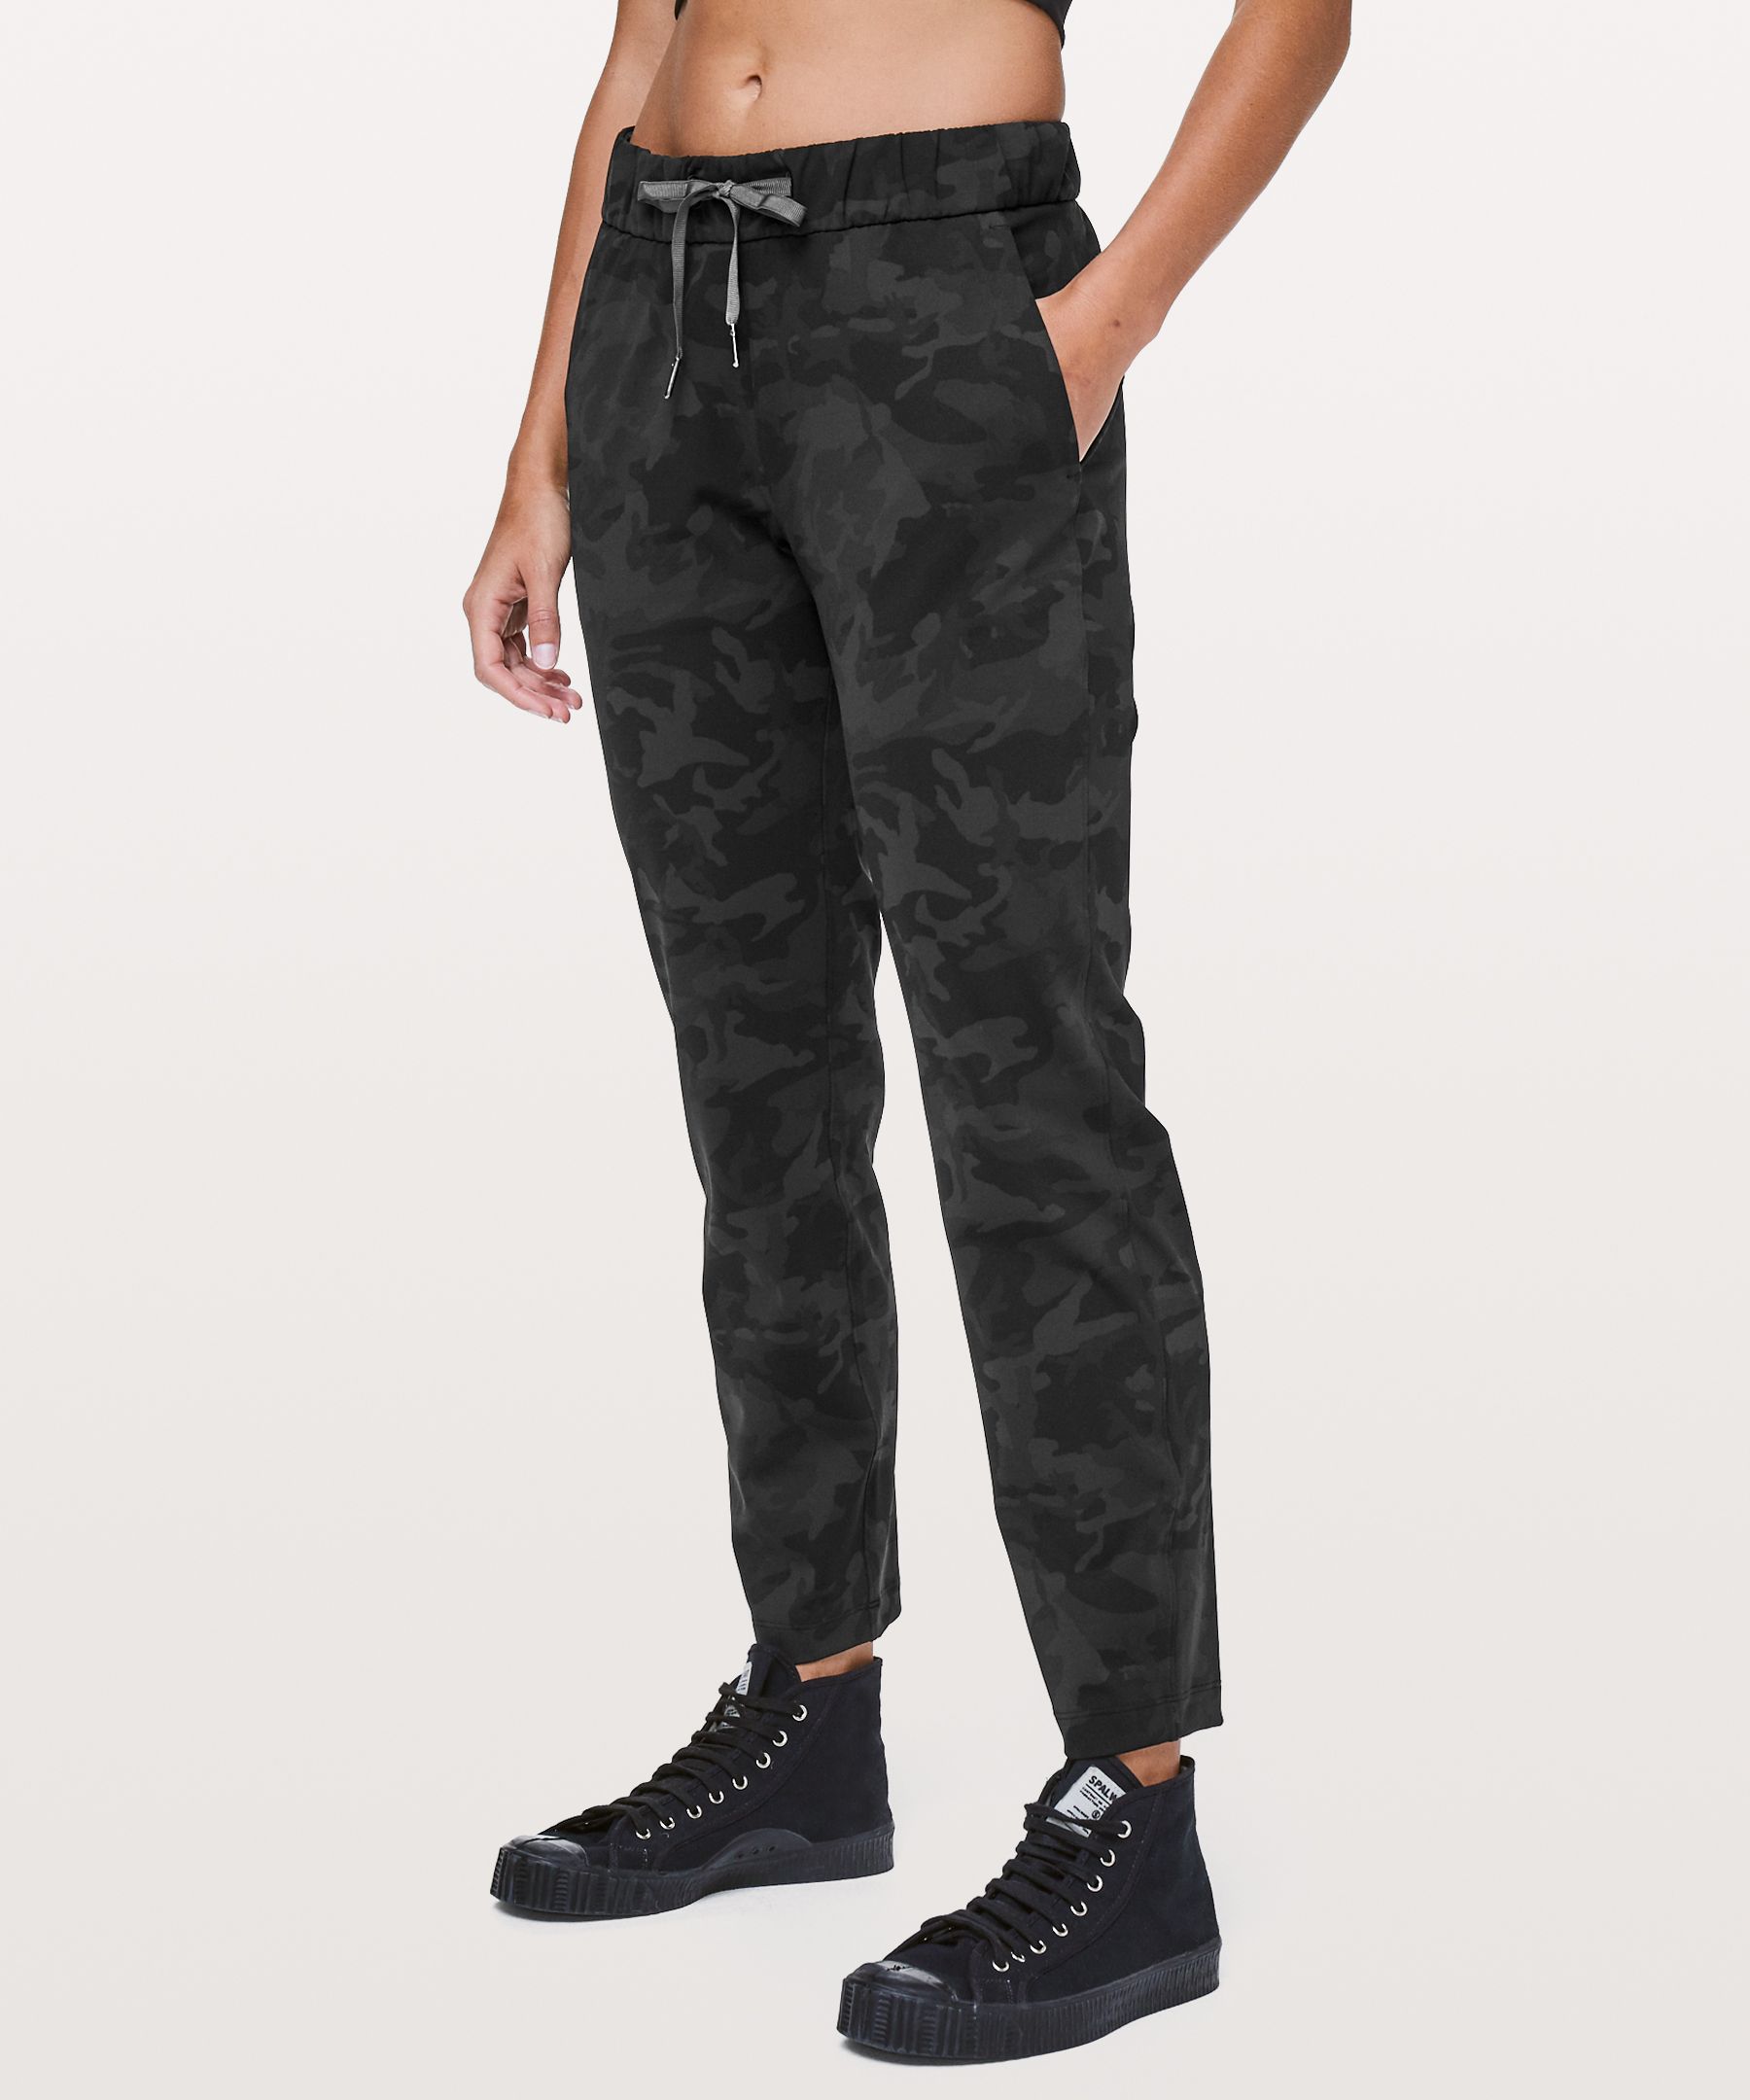 Lululemon On The Fly 7/8 Pant 25" In Incognito Camo Multi Grey/coal